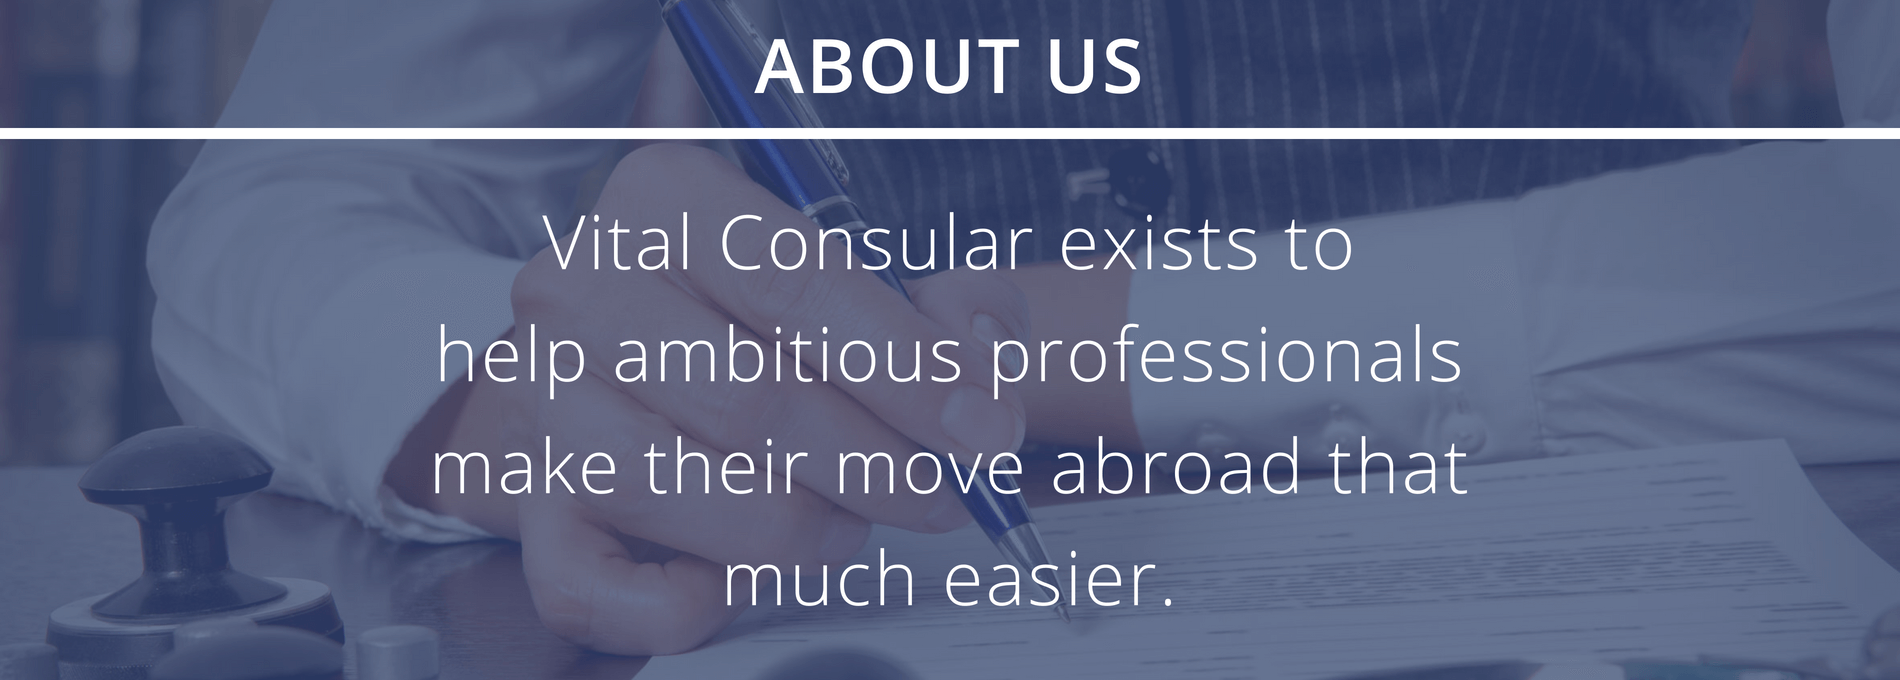 Vital Consular About Us